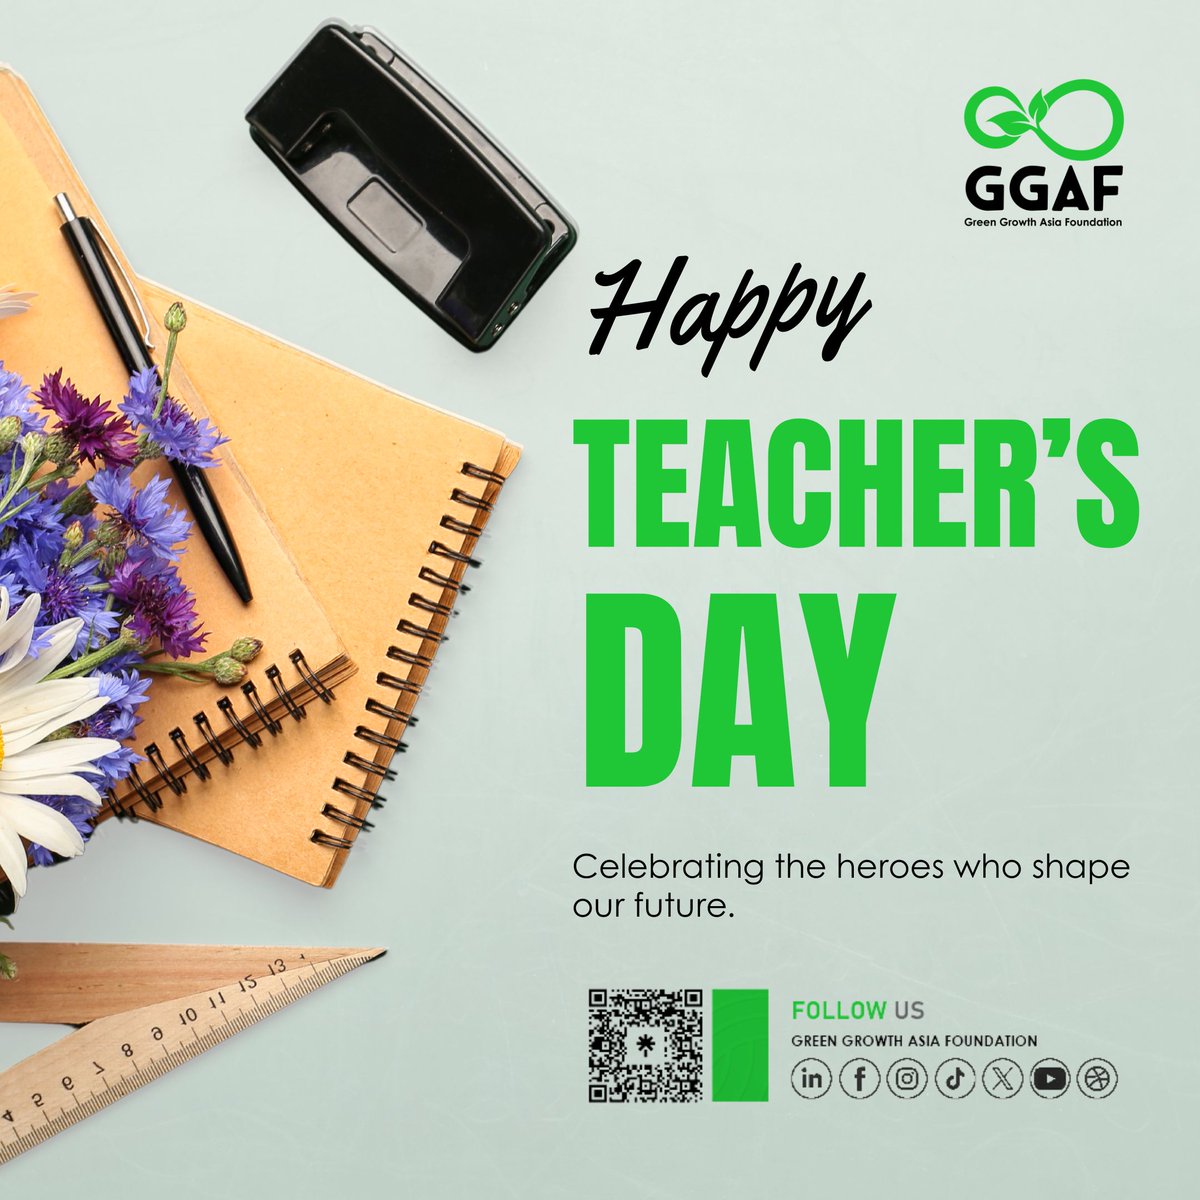 🌍🌱 Happy Teacher's Day! 🌱🌍

At GGAF, we believe in empowering youth to take individual climate action. 

#TeachersDay #GGAF #IndividualClimateAction #YouthEmpowerment #GreenGrowth #Sustainability #ThankYouTeachers